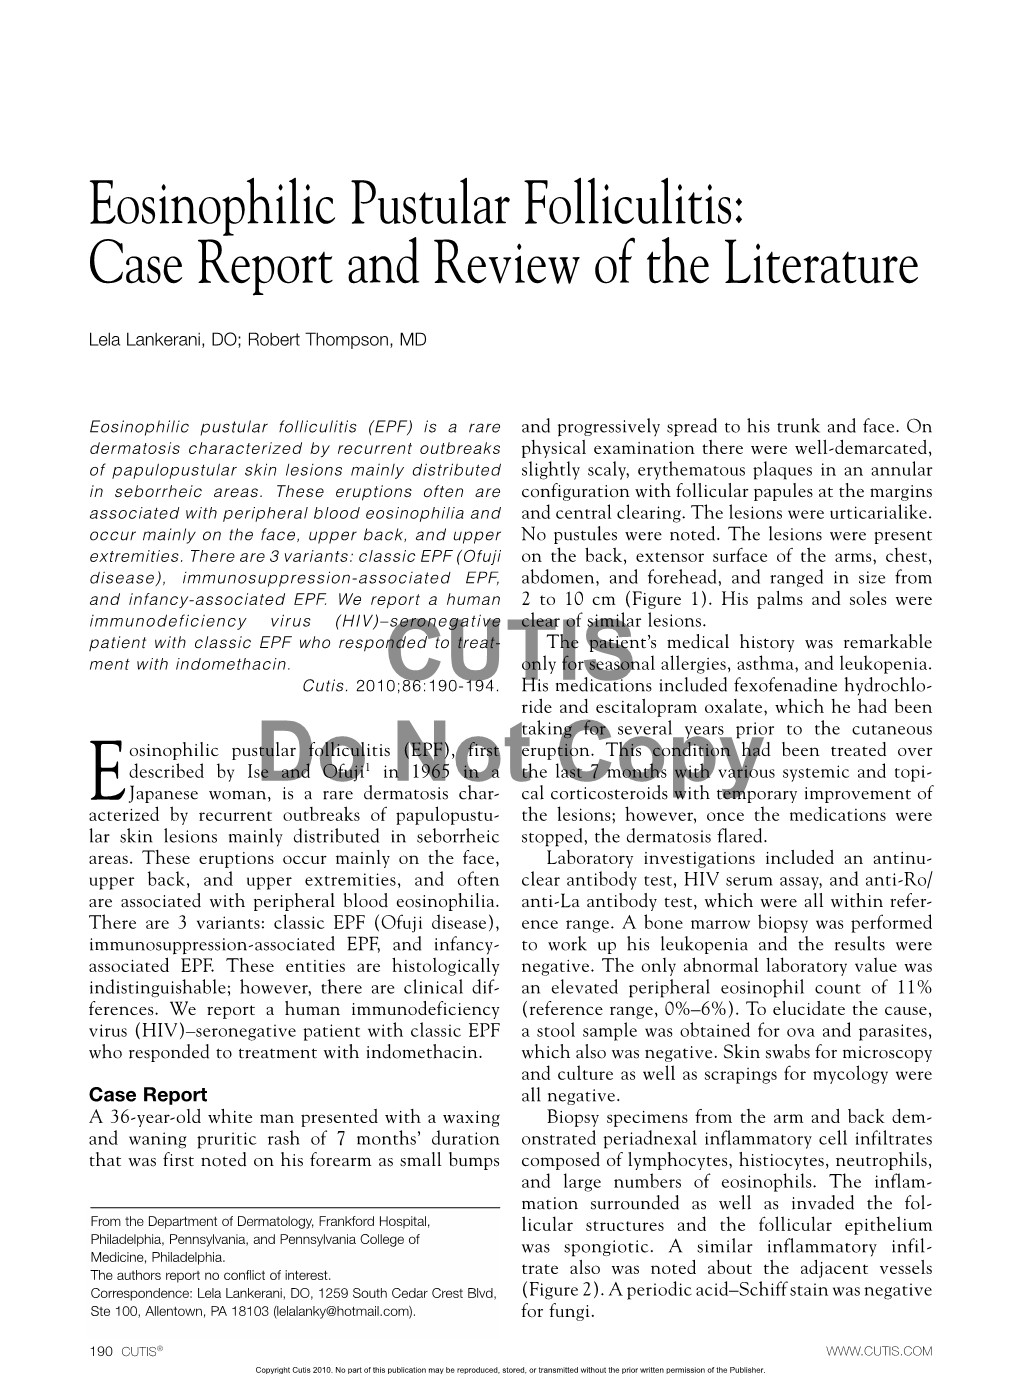 Eosinophilic Pustular Folliculitis Case Report And Review Of The